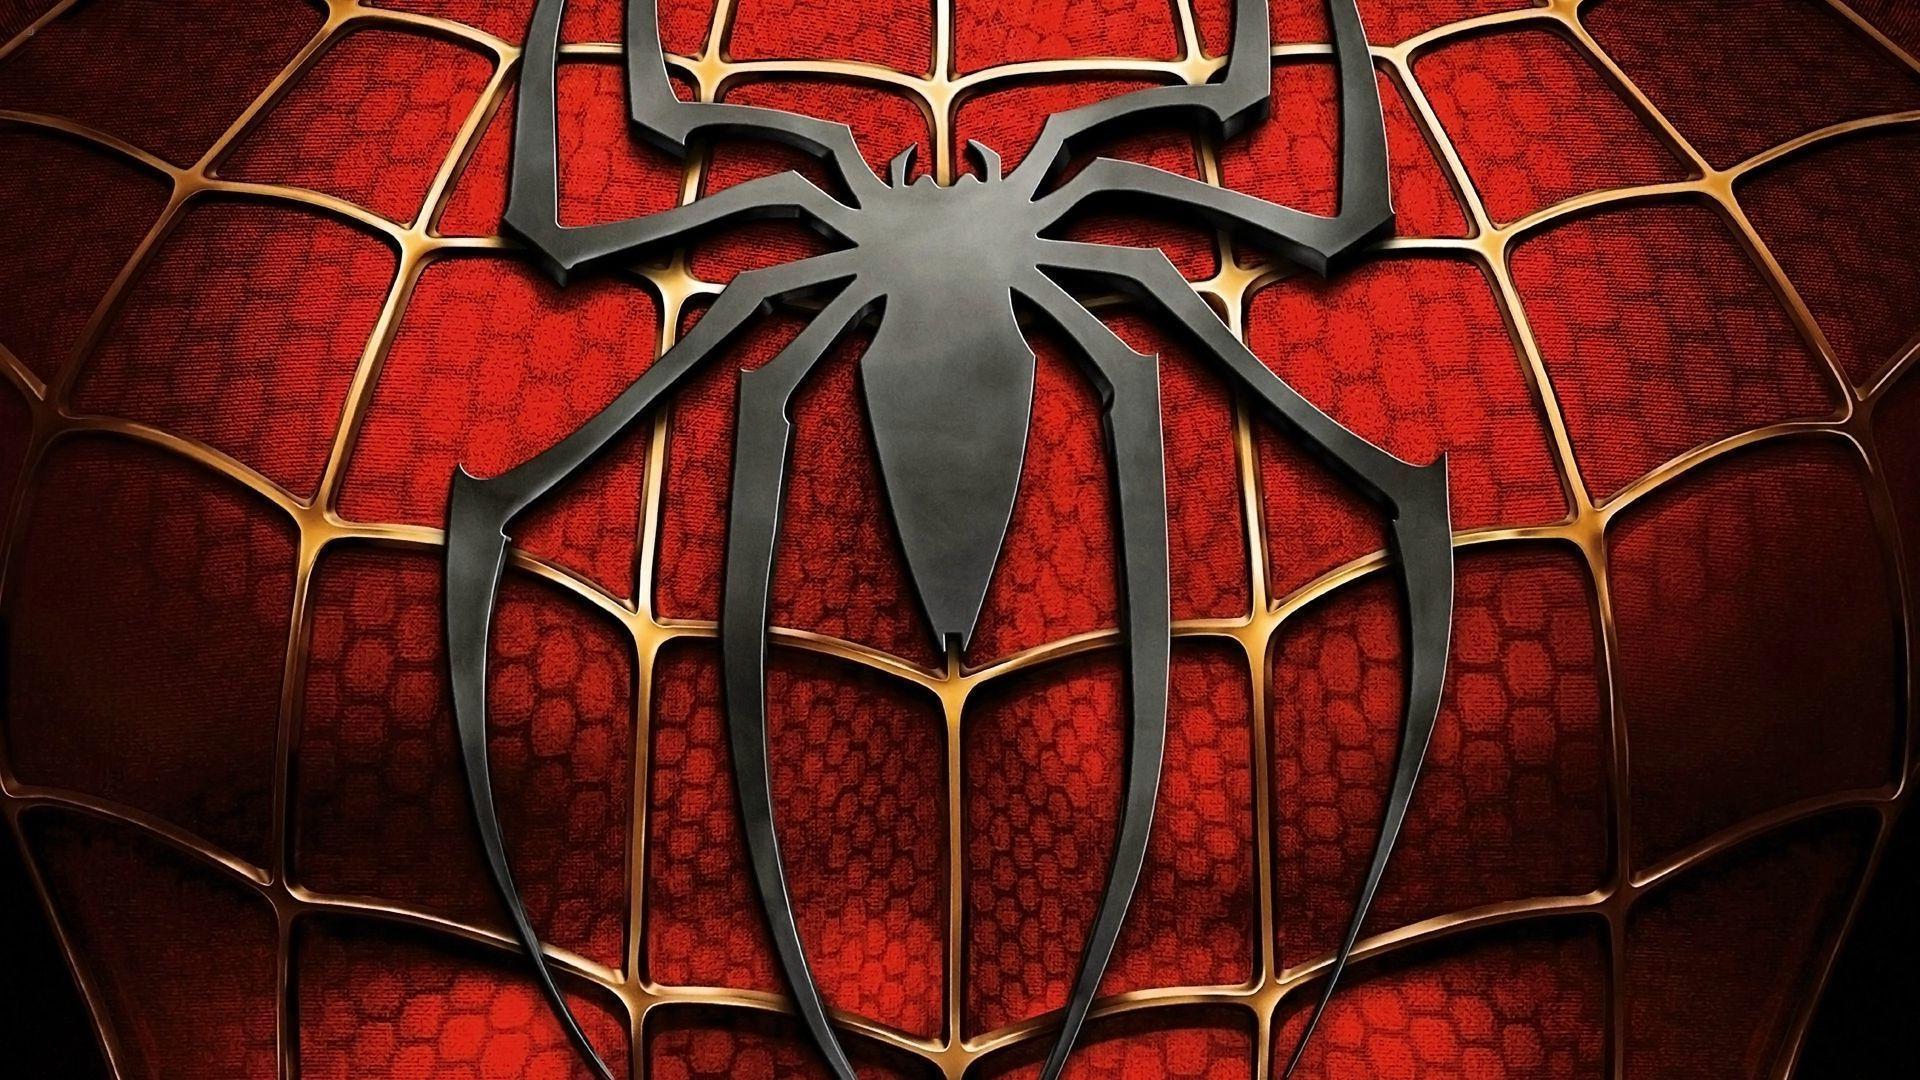 spiderman logo 2014 « Wallpaper Wide, HD (High Definition) and Mobile